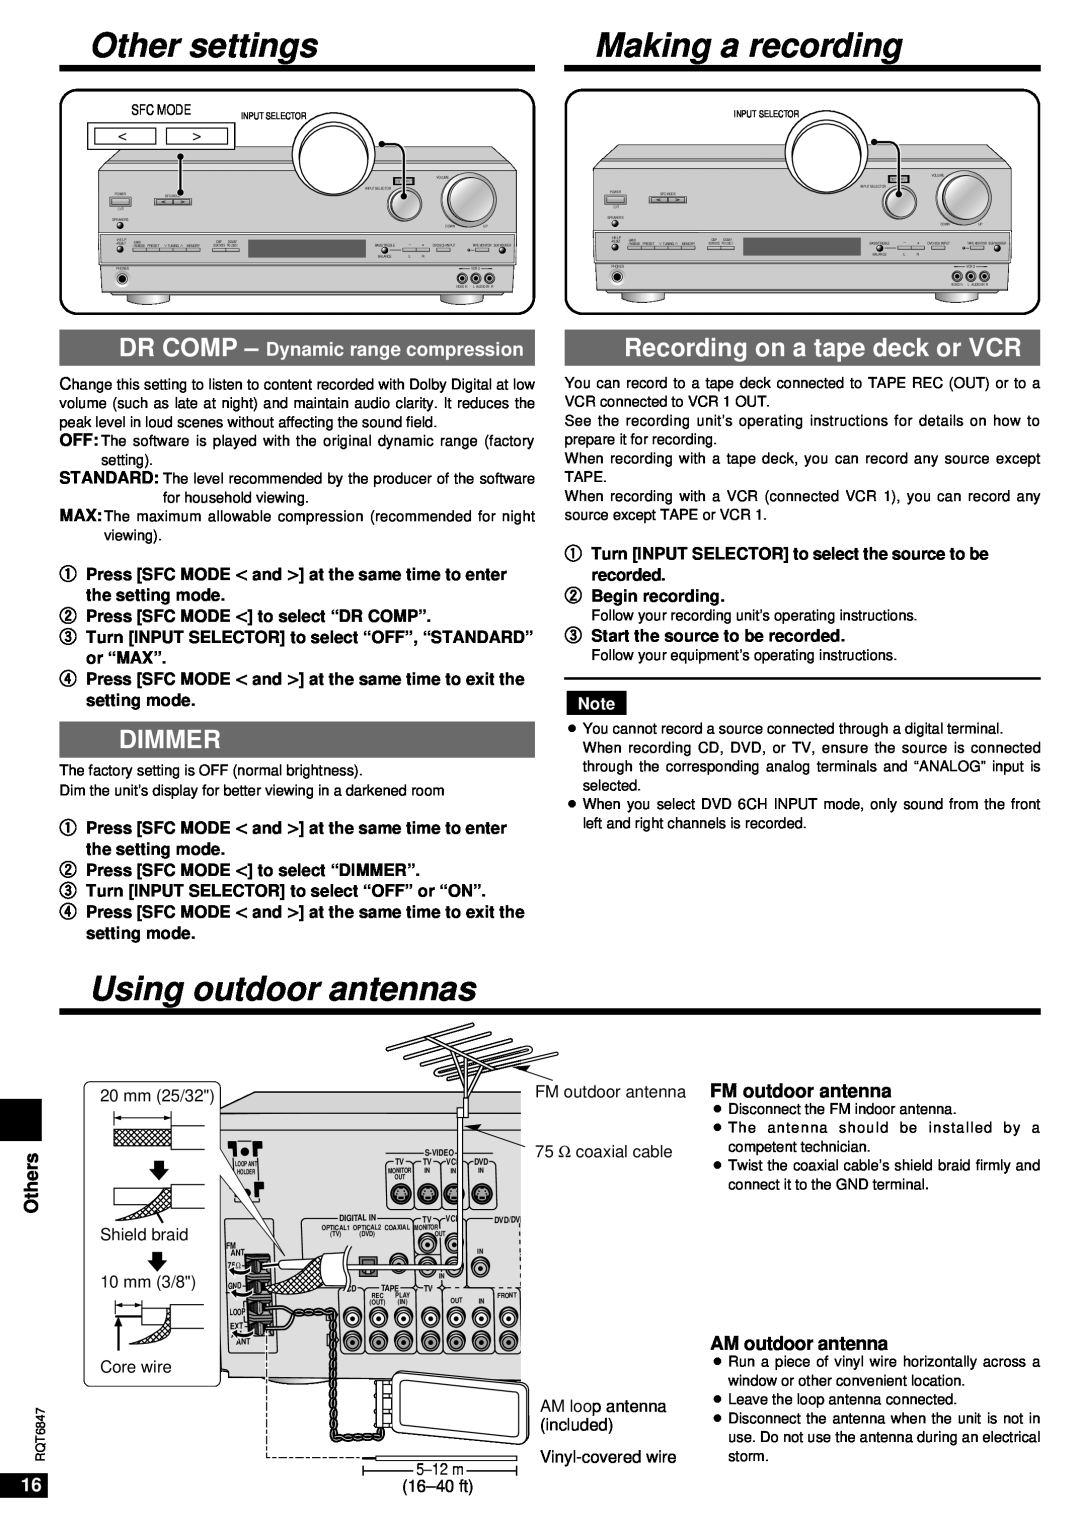 Panasonic SA-HE75 Other settings, Making a recording, Using outdoor antennas, Recording on a tape deck or VCR, Dimmer 